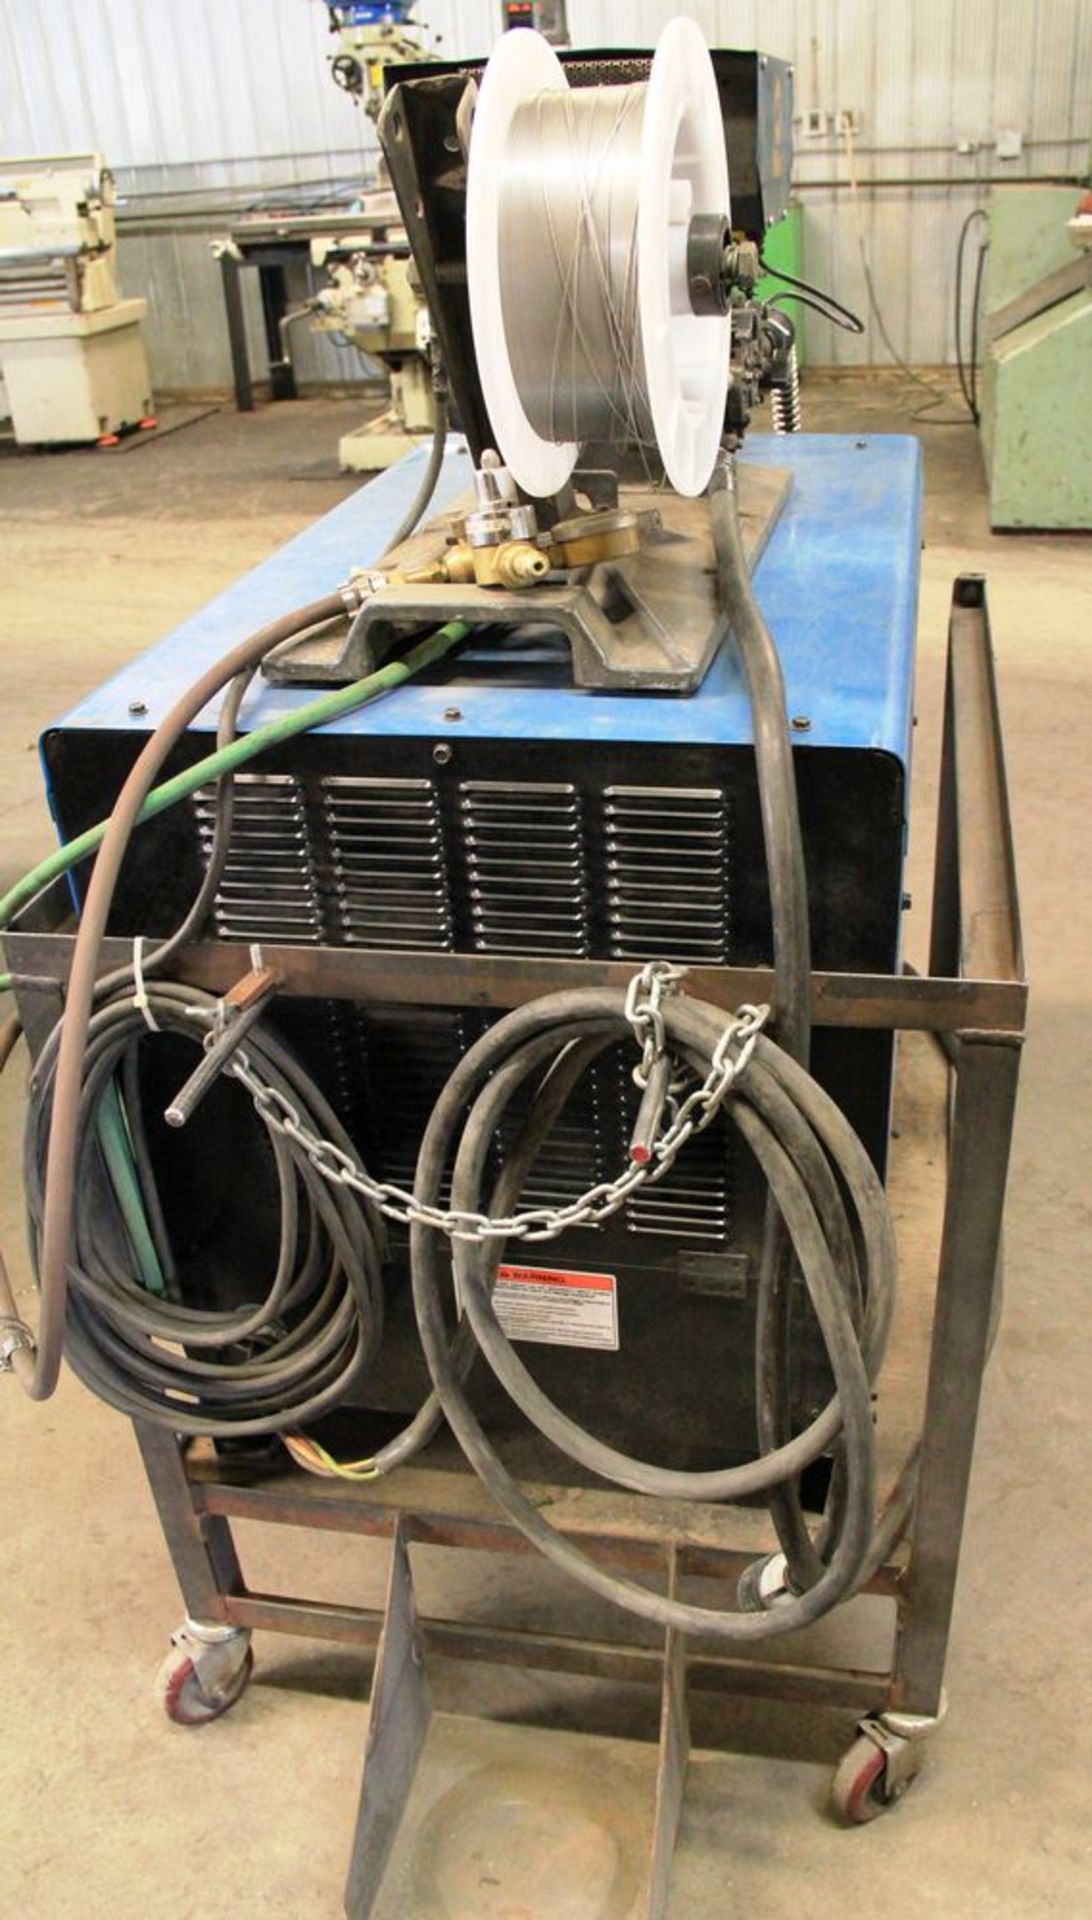 MILLER DIMENSION 452 ELECTRIC WELDER, DIGITAL READ-OUT, MILLER S-54E WIRE FEEDER MOUNTED ON CART, - Image 3 of 3